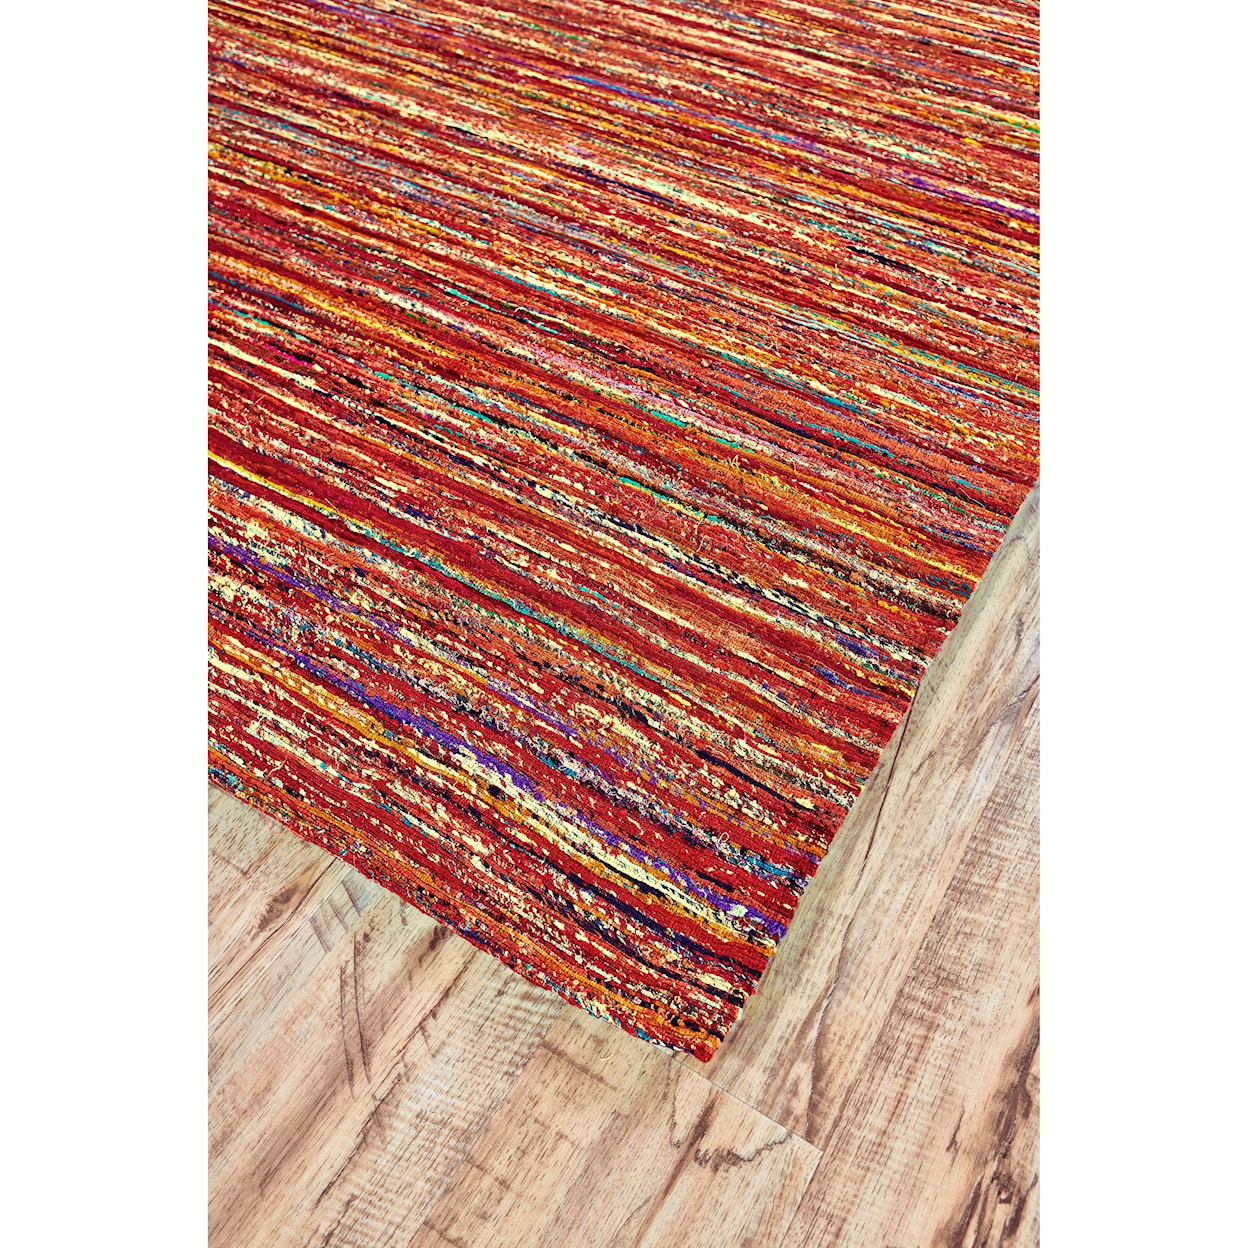 Feizy Rugs Arushi Red/Multi 8' X 11' Area Rug